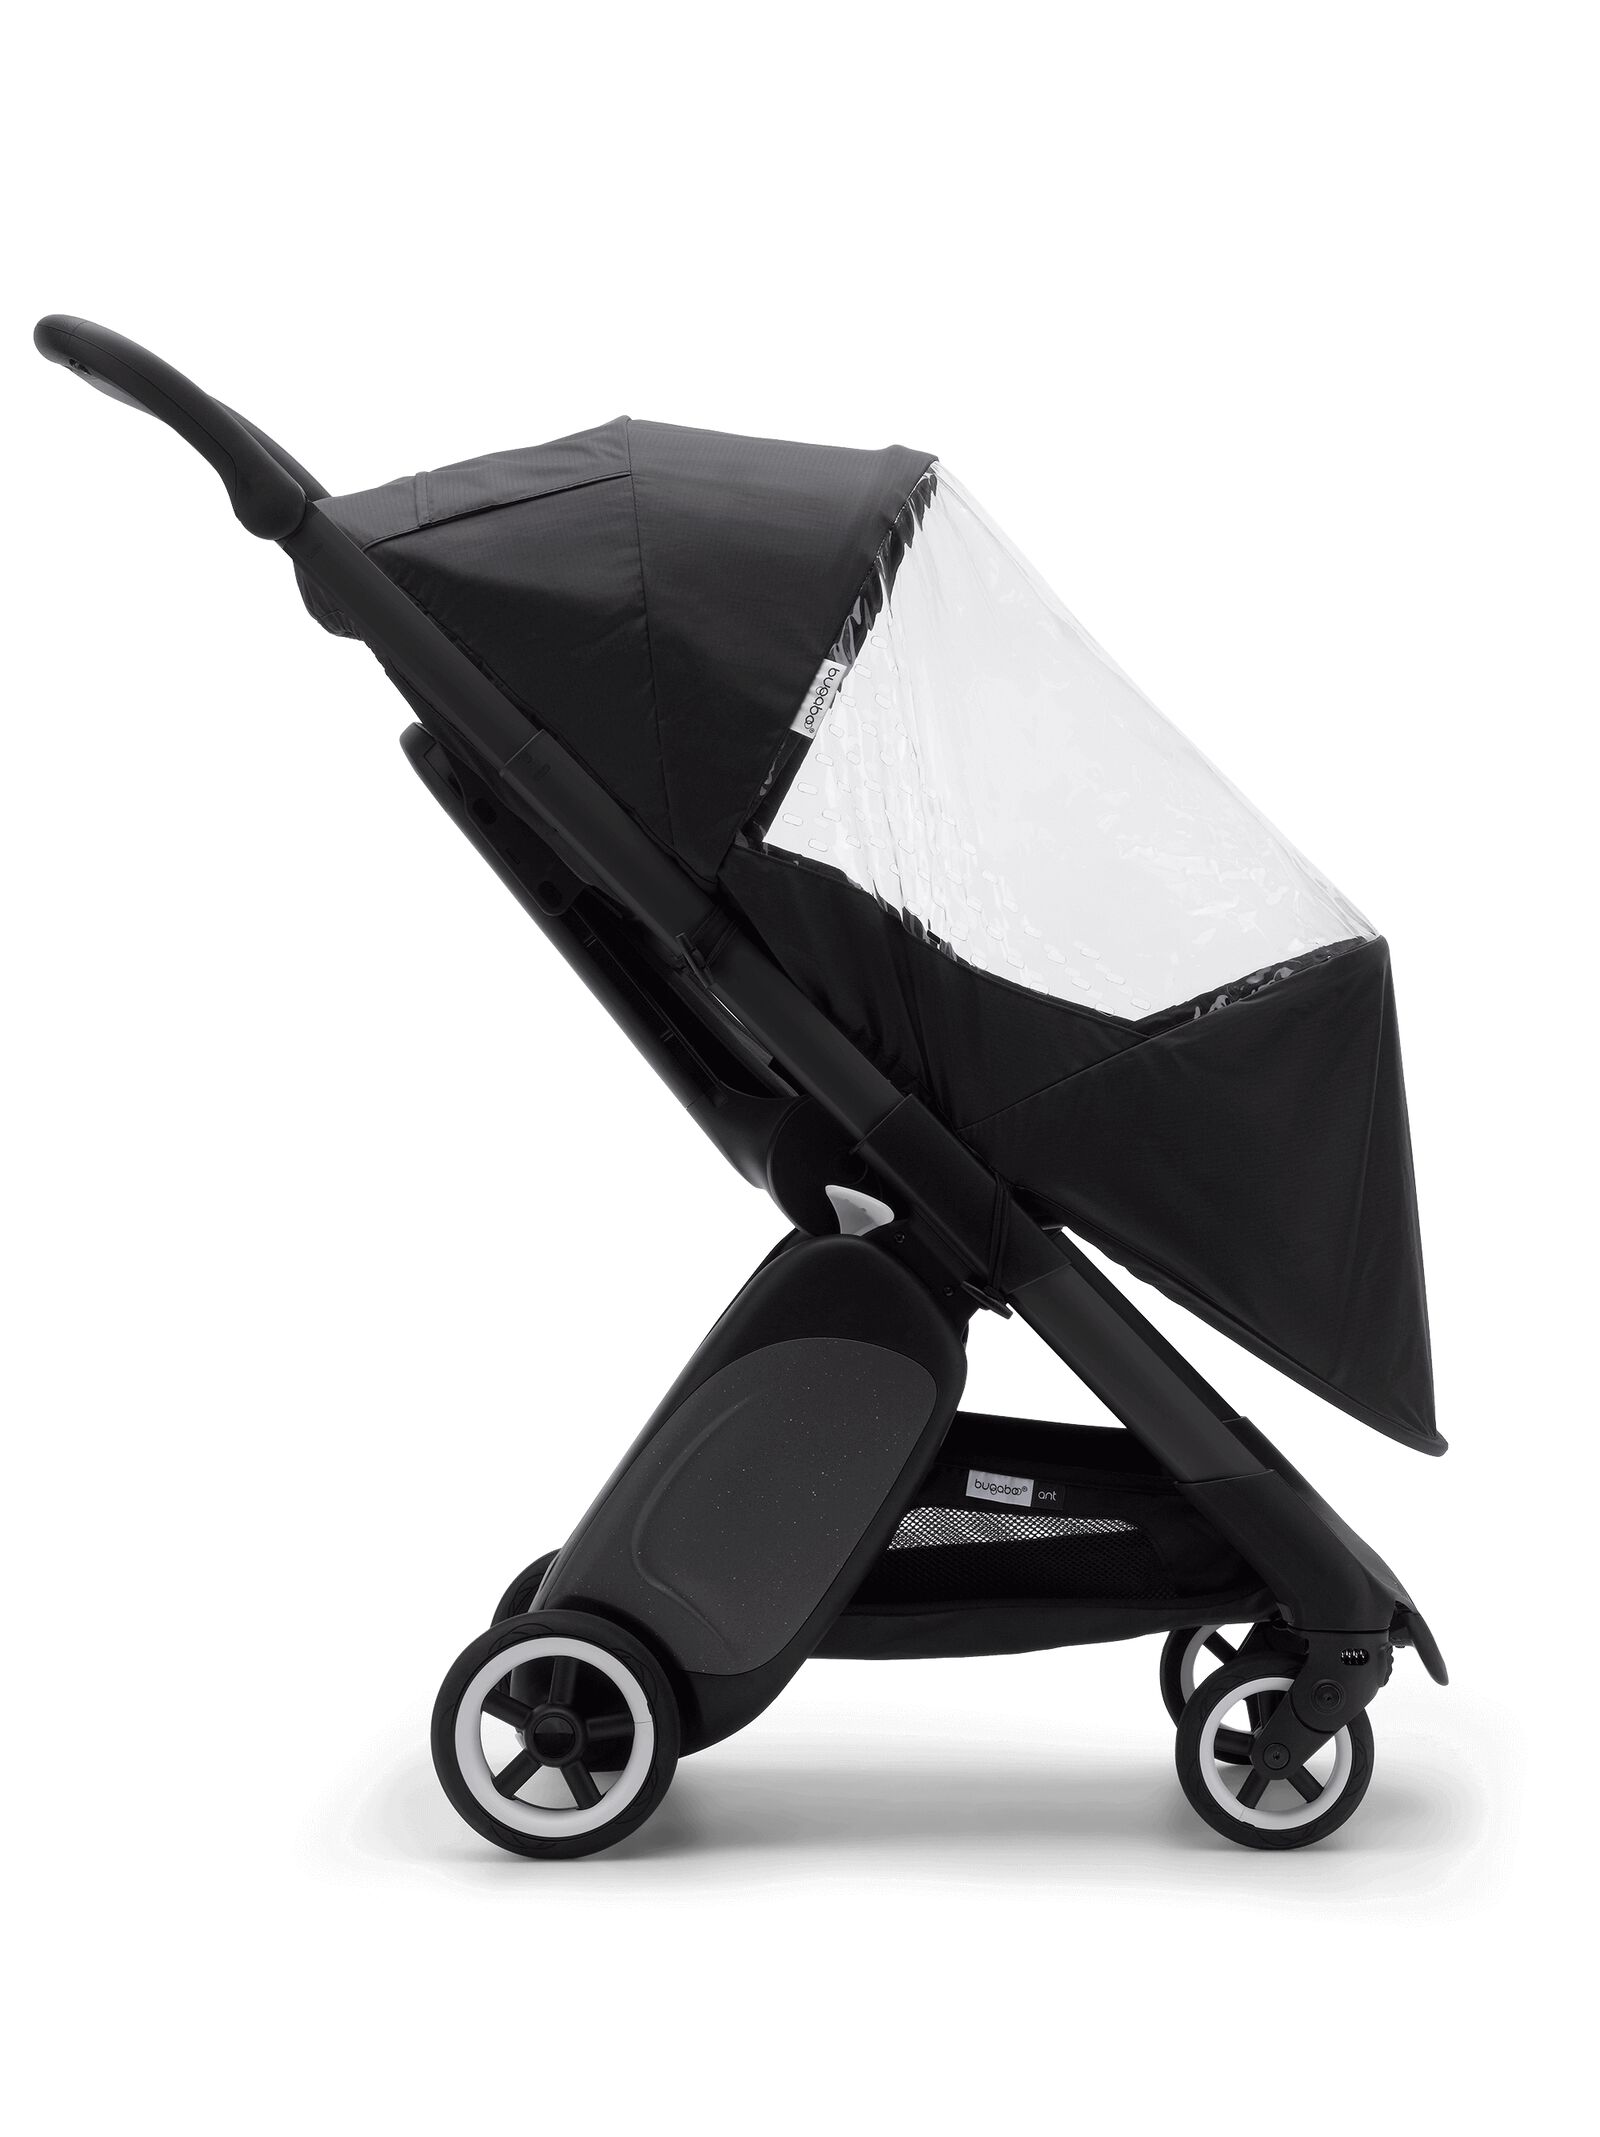 Bugaboo Ant raincover - View 2